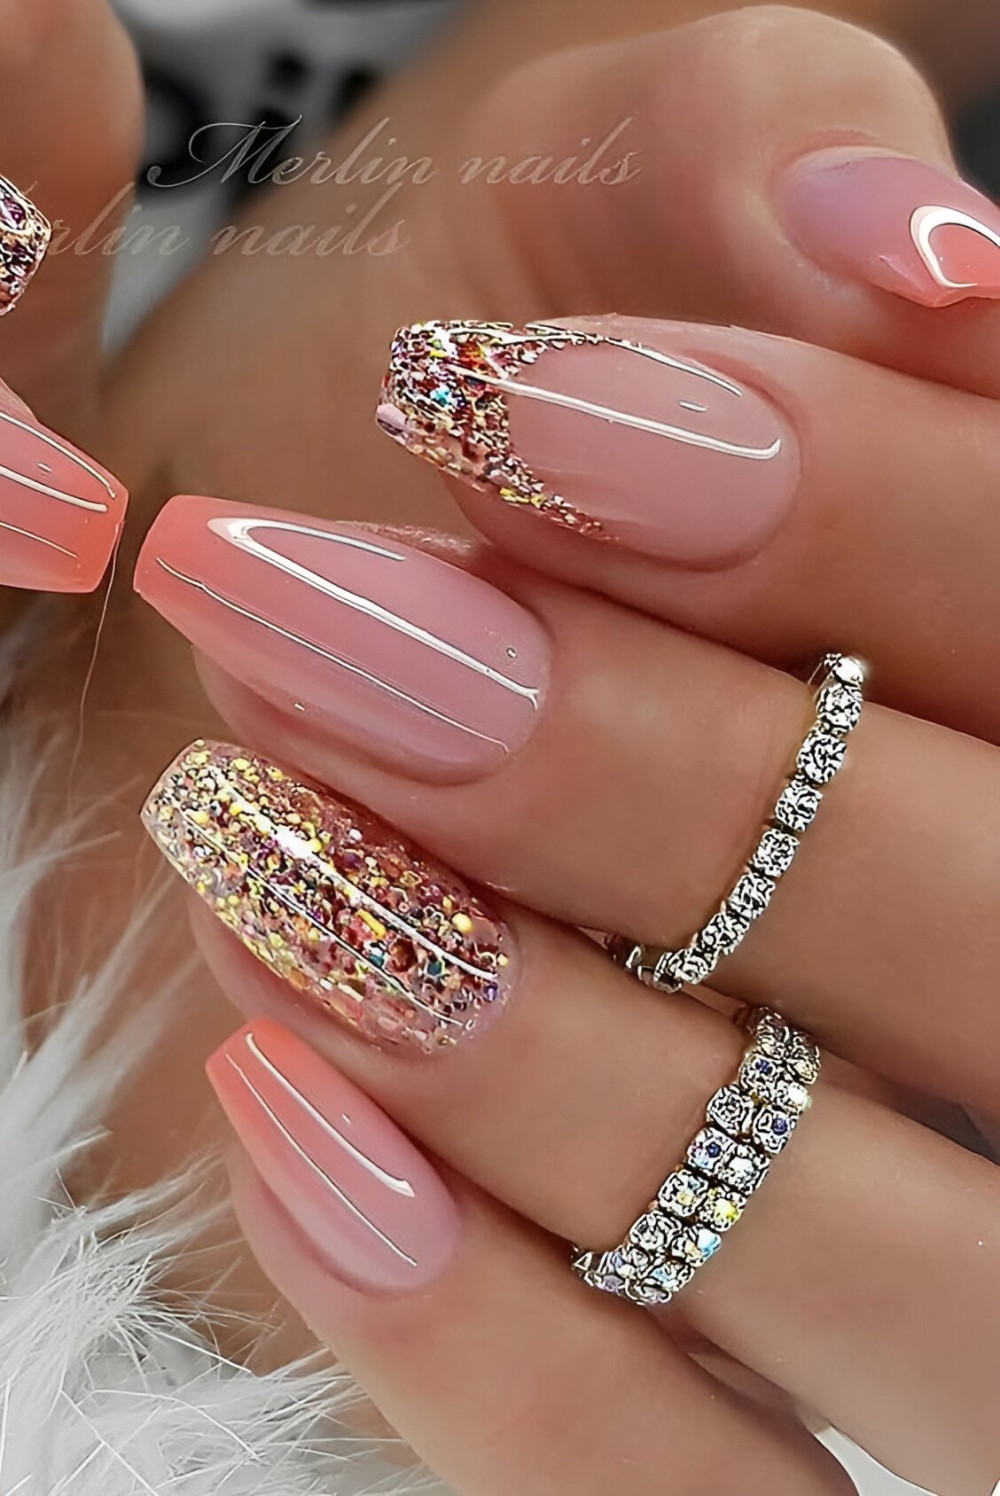 35 Breathtaking Nail Design Ideas For The Perfect Manicure - 281